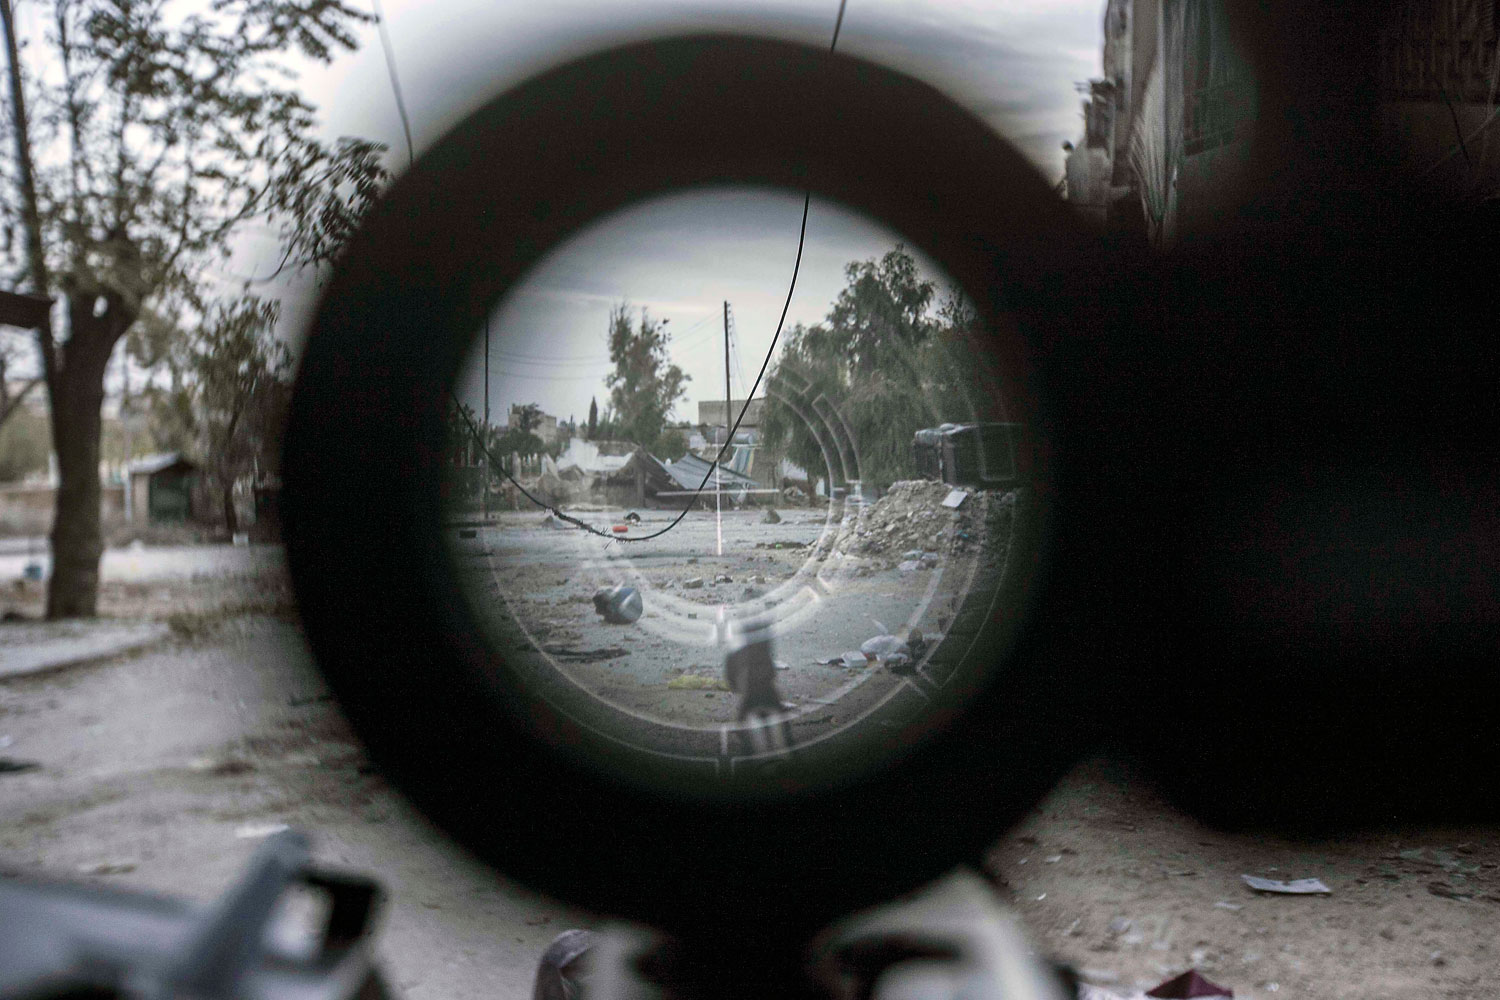 Image: Nov. 2, 2012. A sniper line-of-fire is seen through the scope of a rebel fighter's gun in the Karm al-Jebel neighborhood in Aleppo, Syria.